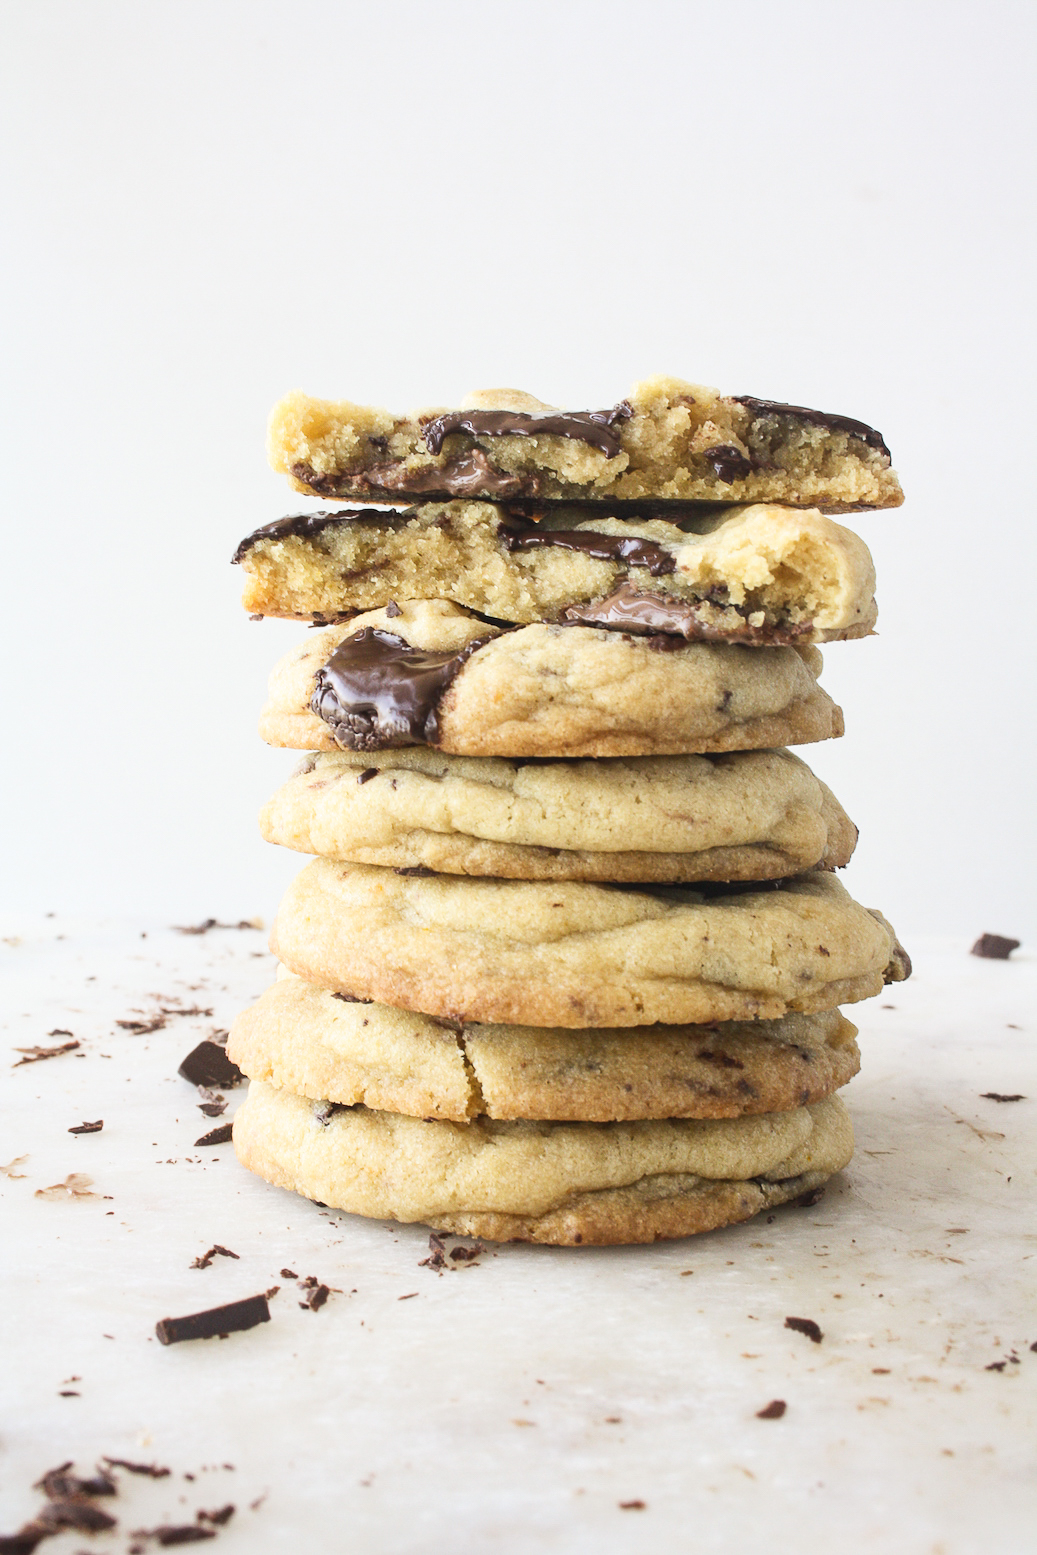 Crispy-edged, chewy-centered cookies filled with melty chocolate and orange zest!